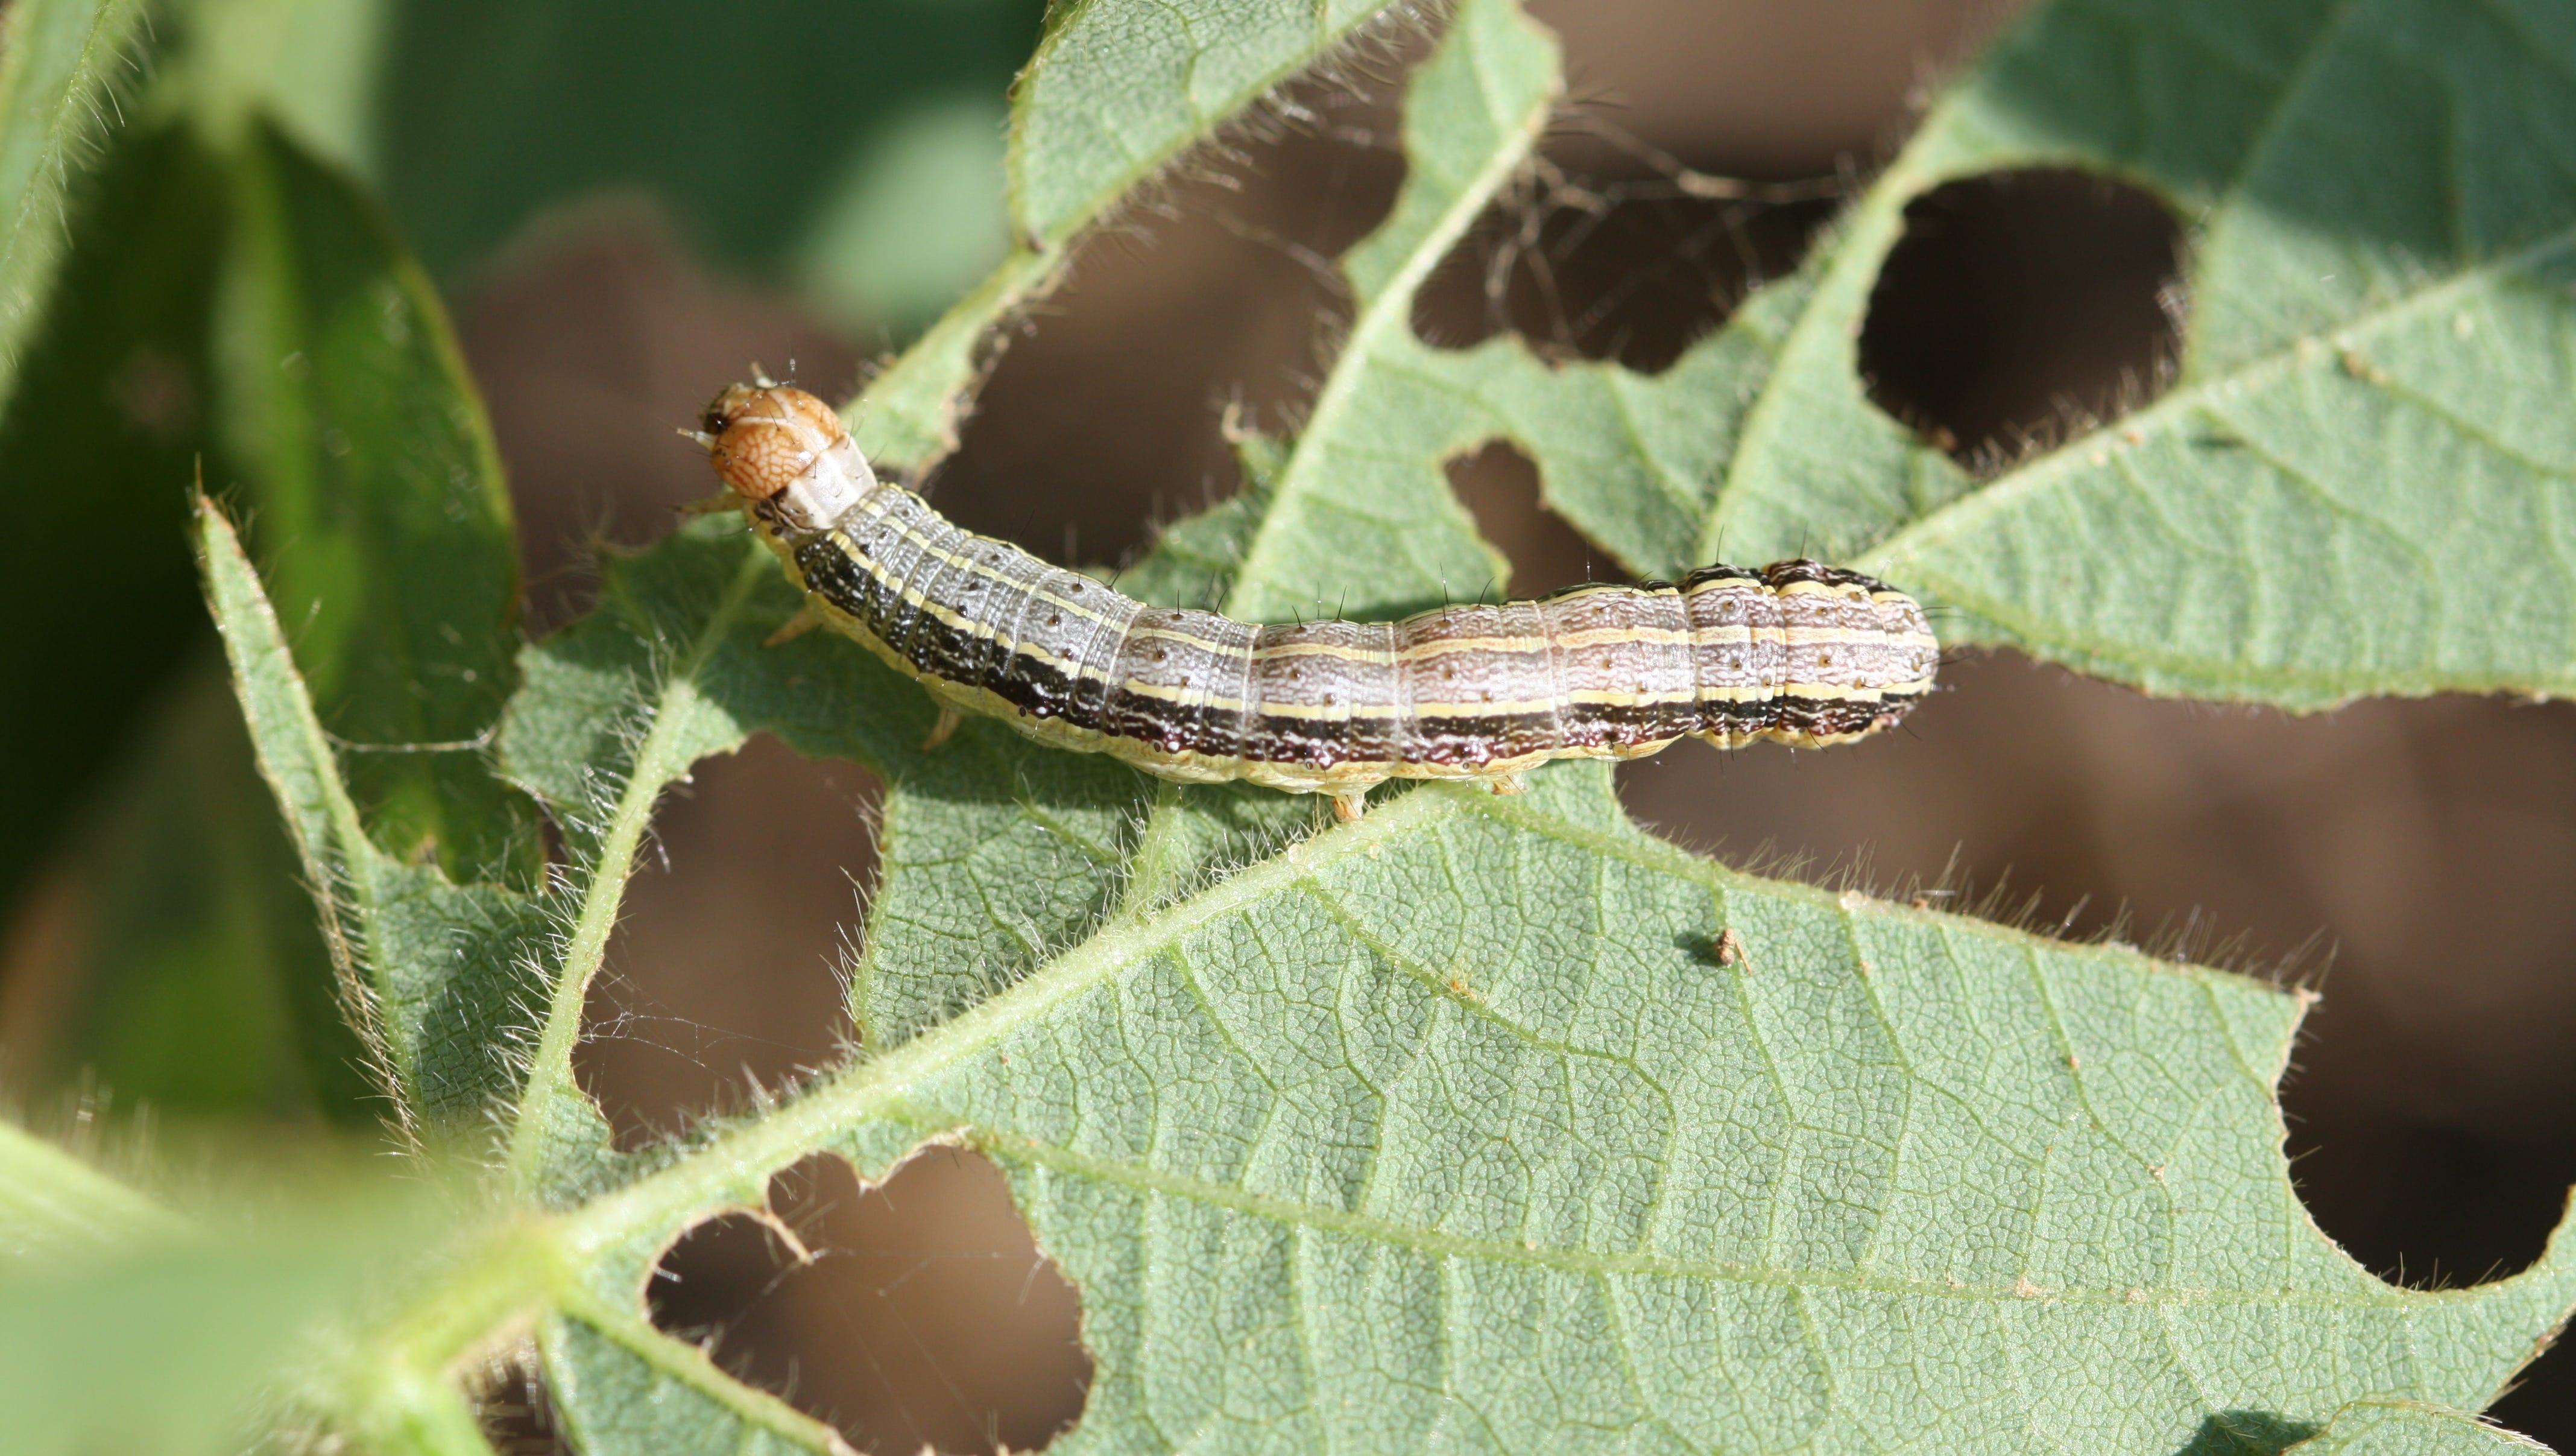 High number of fall armyworms in Arkansas appearing in pastures, lawns